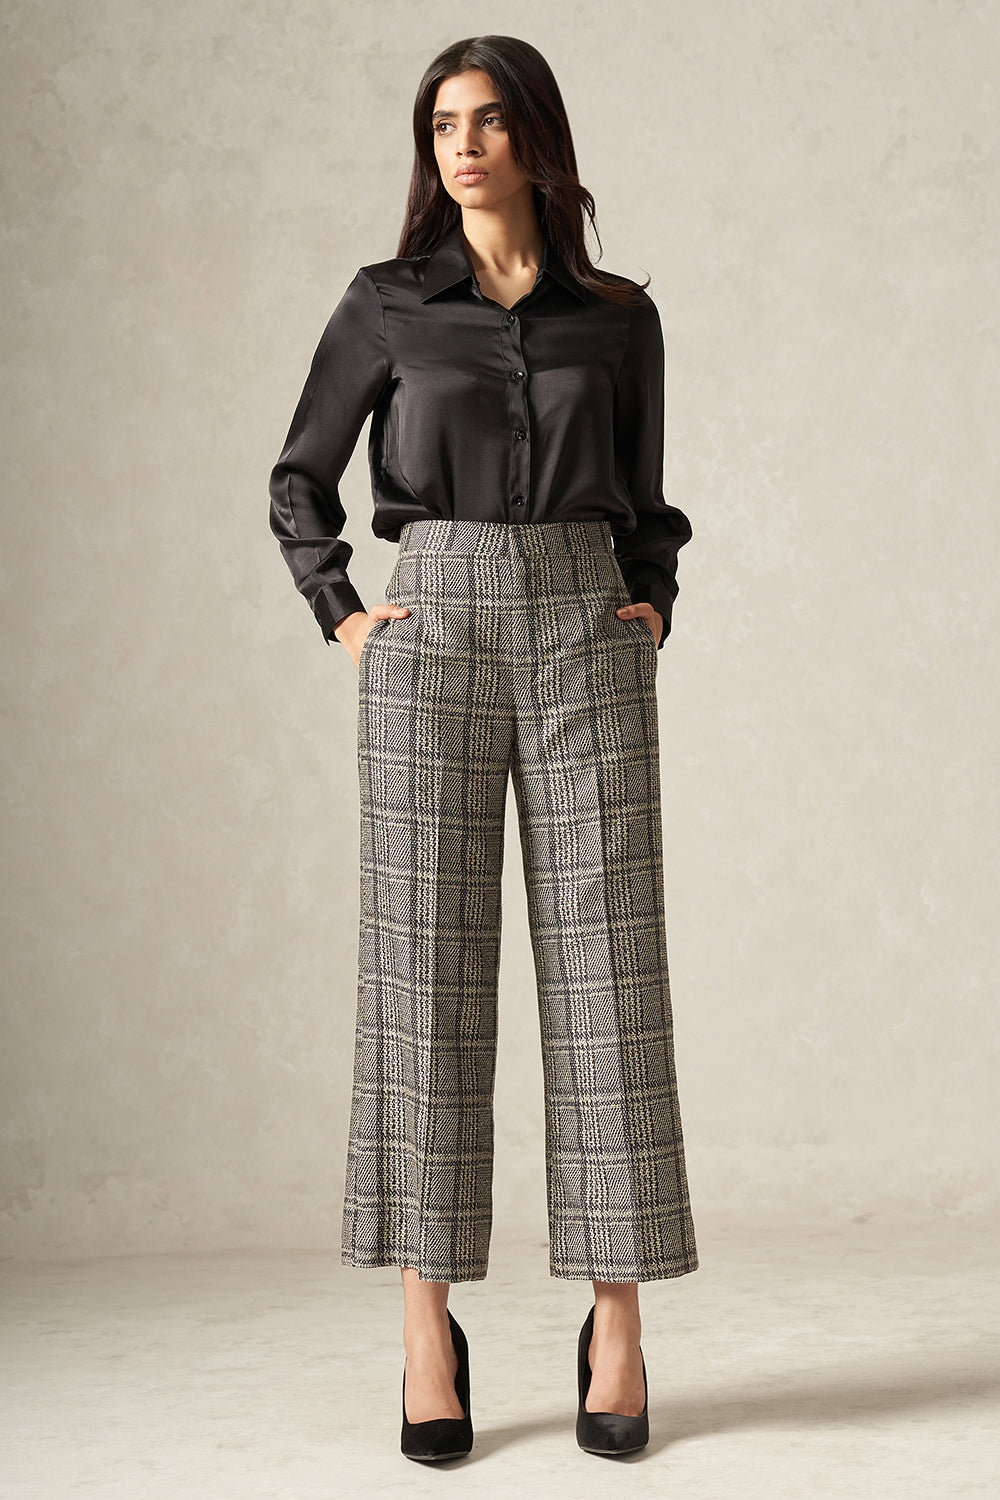 Black and White Pure Silk Handwoven Plaid Patterned Pants - Tilfi